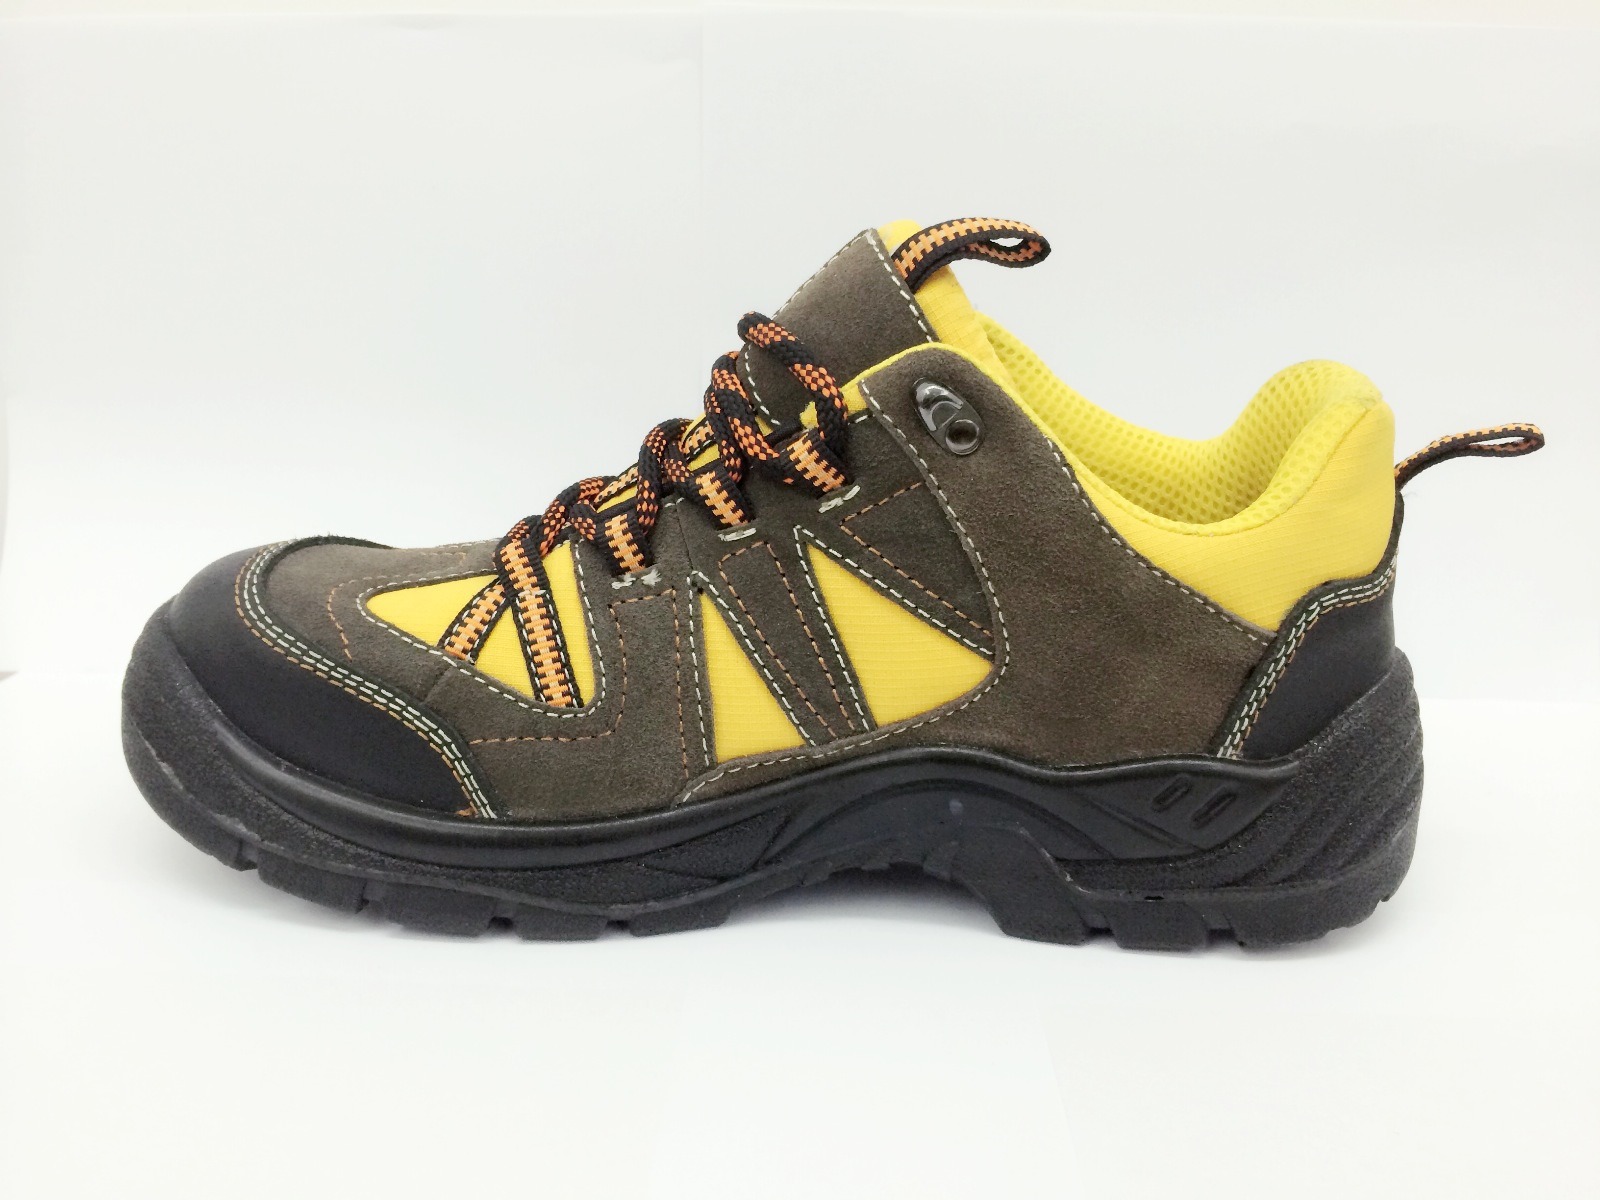 Safety Shoes/Work Boots PU Outsole CE Approval